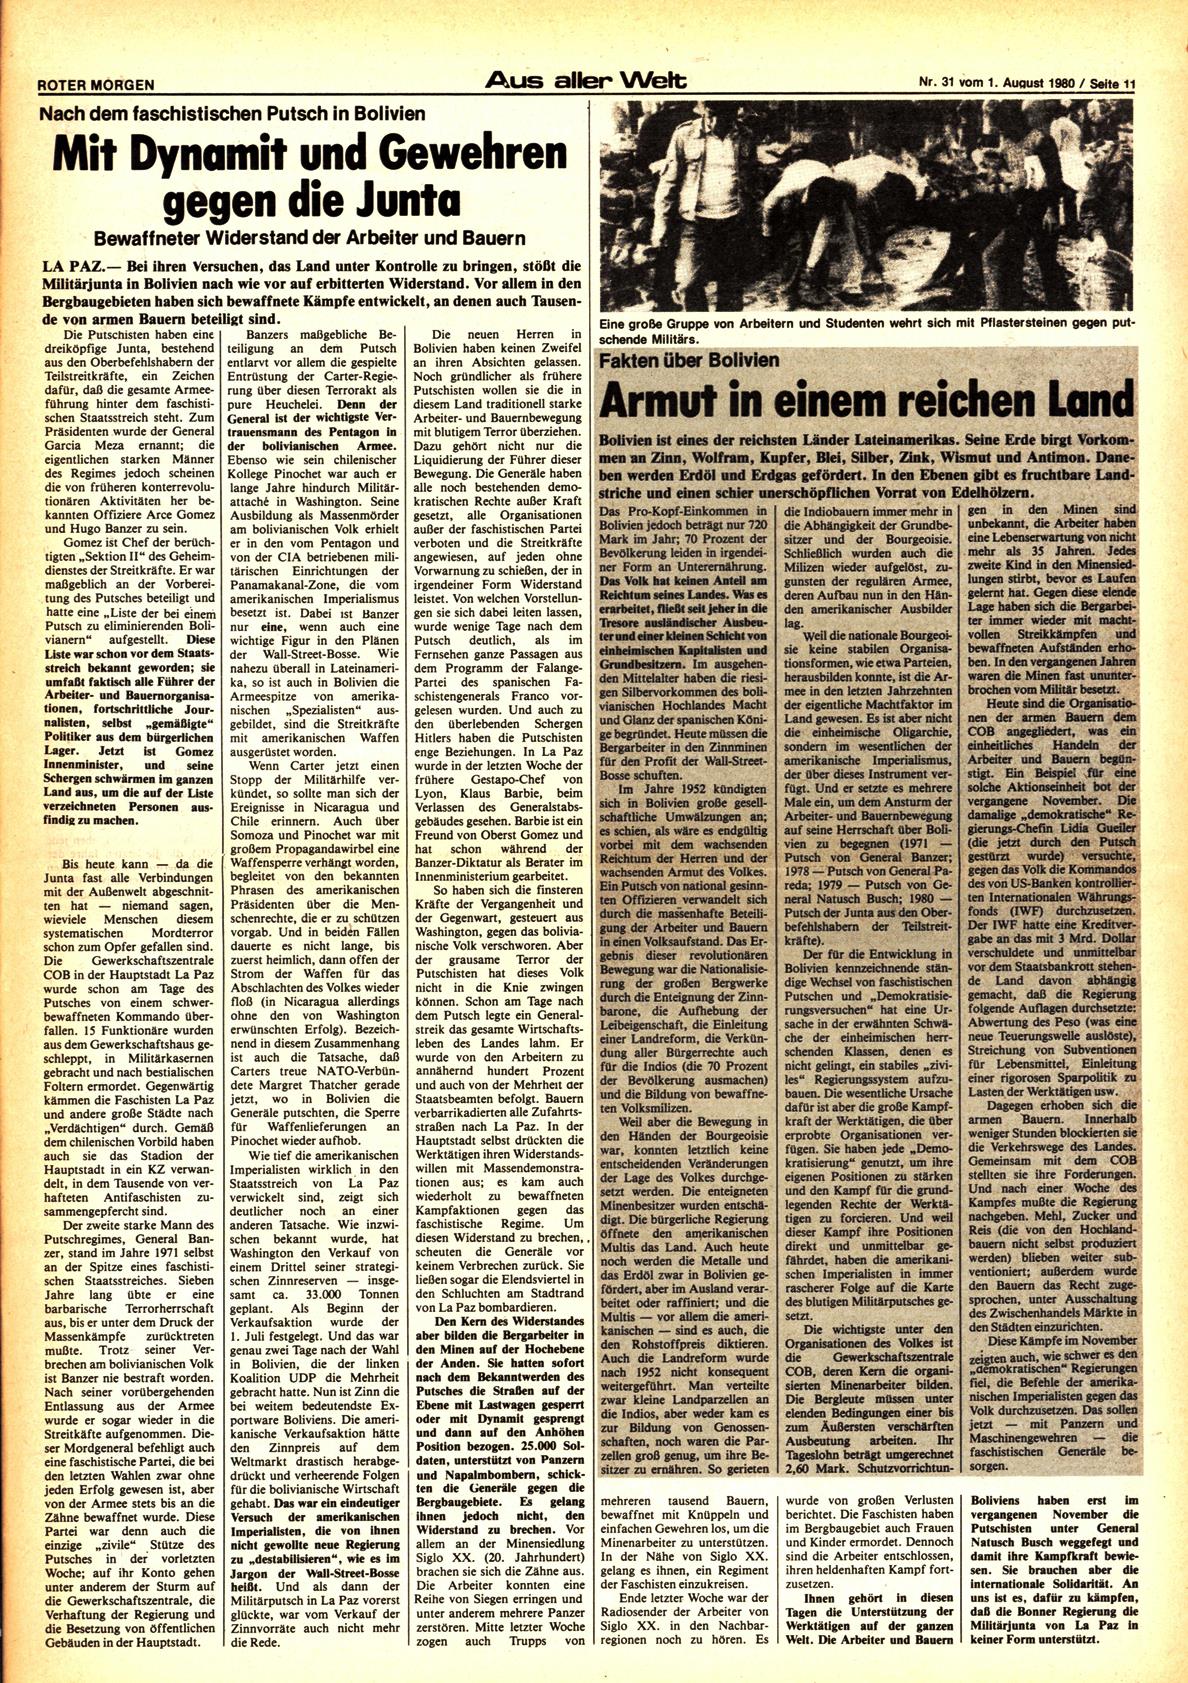 Roter Morgen, 14. Jg., 1. August 1980, Nr. 31, Seite 11